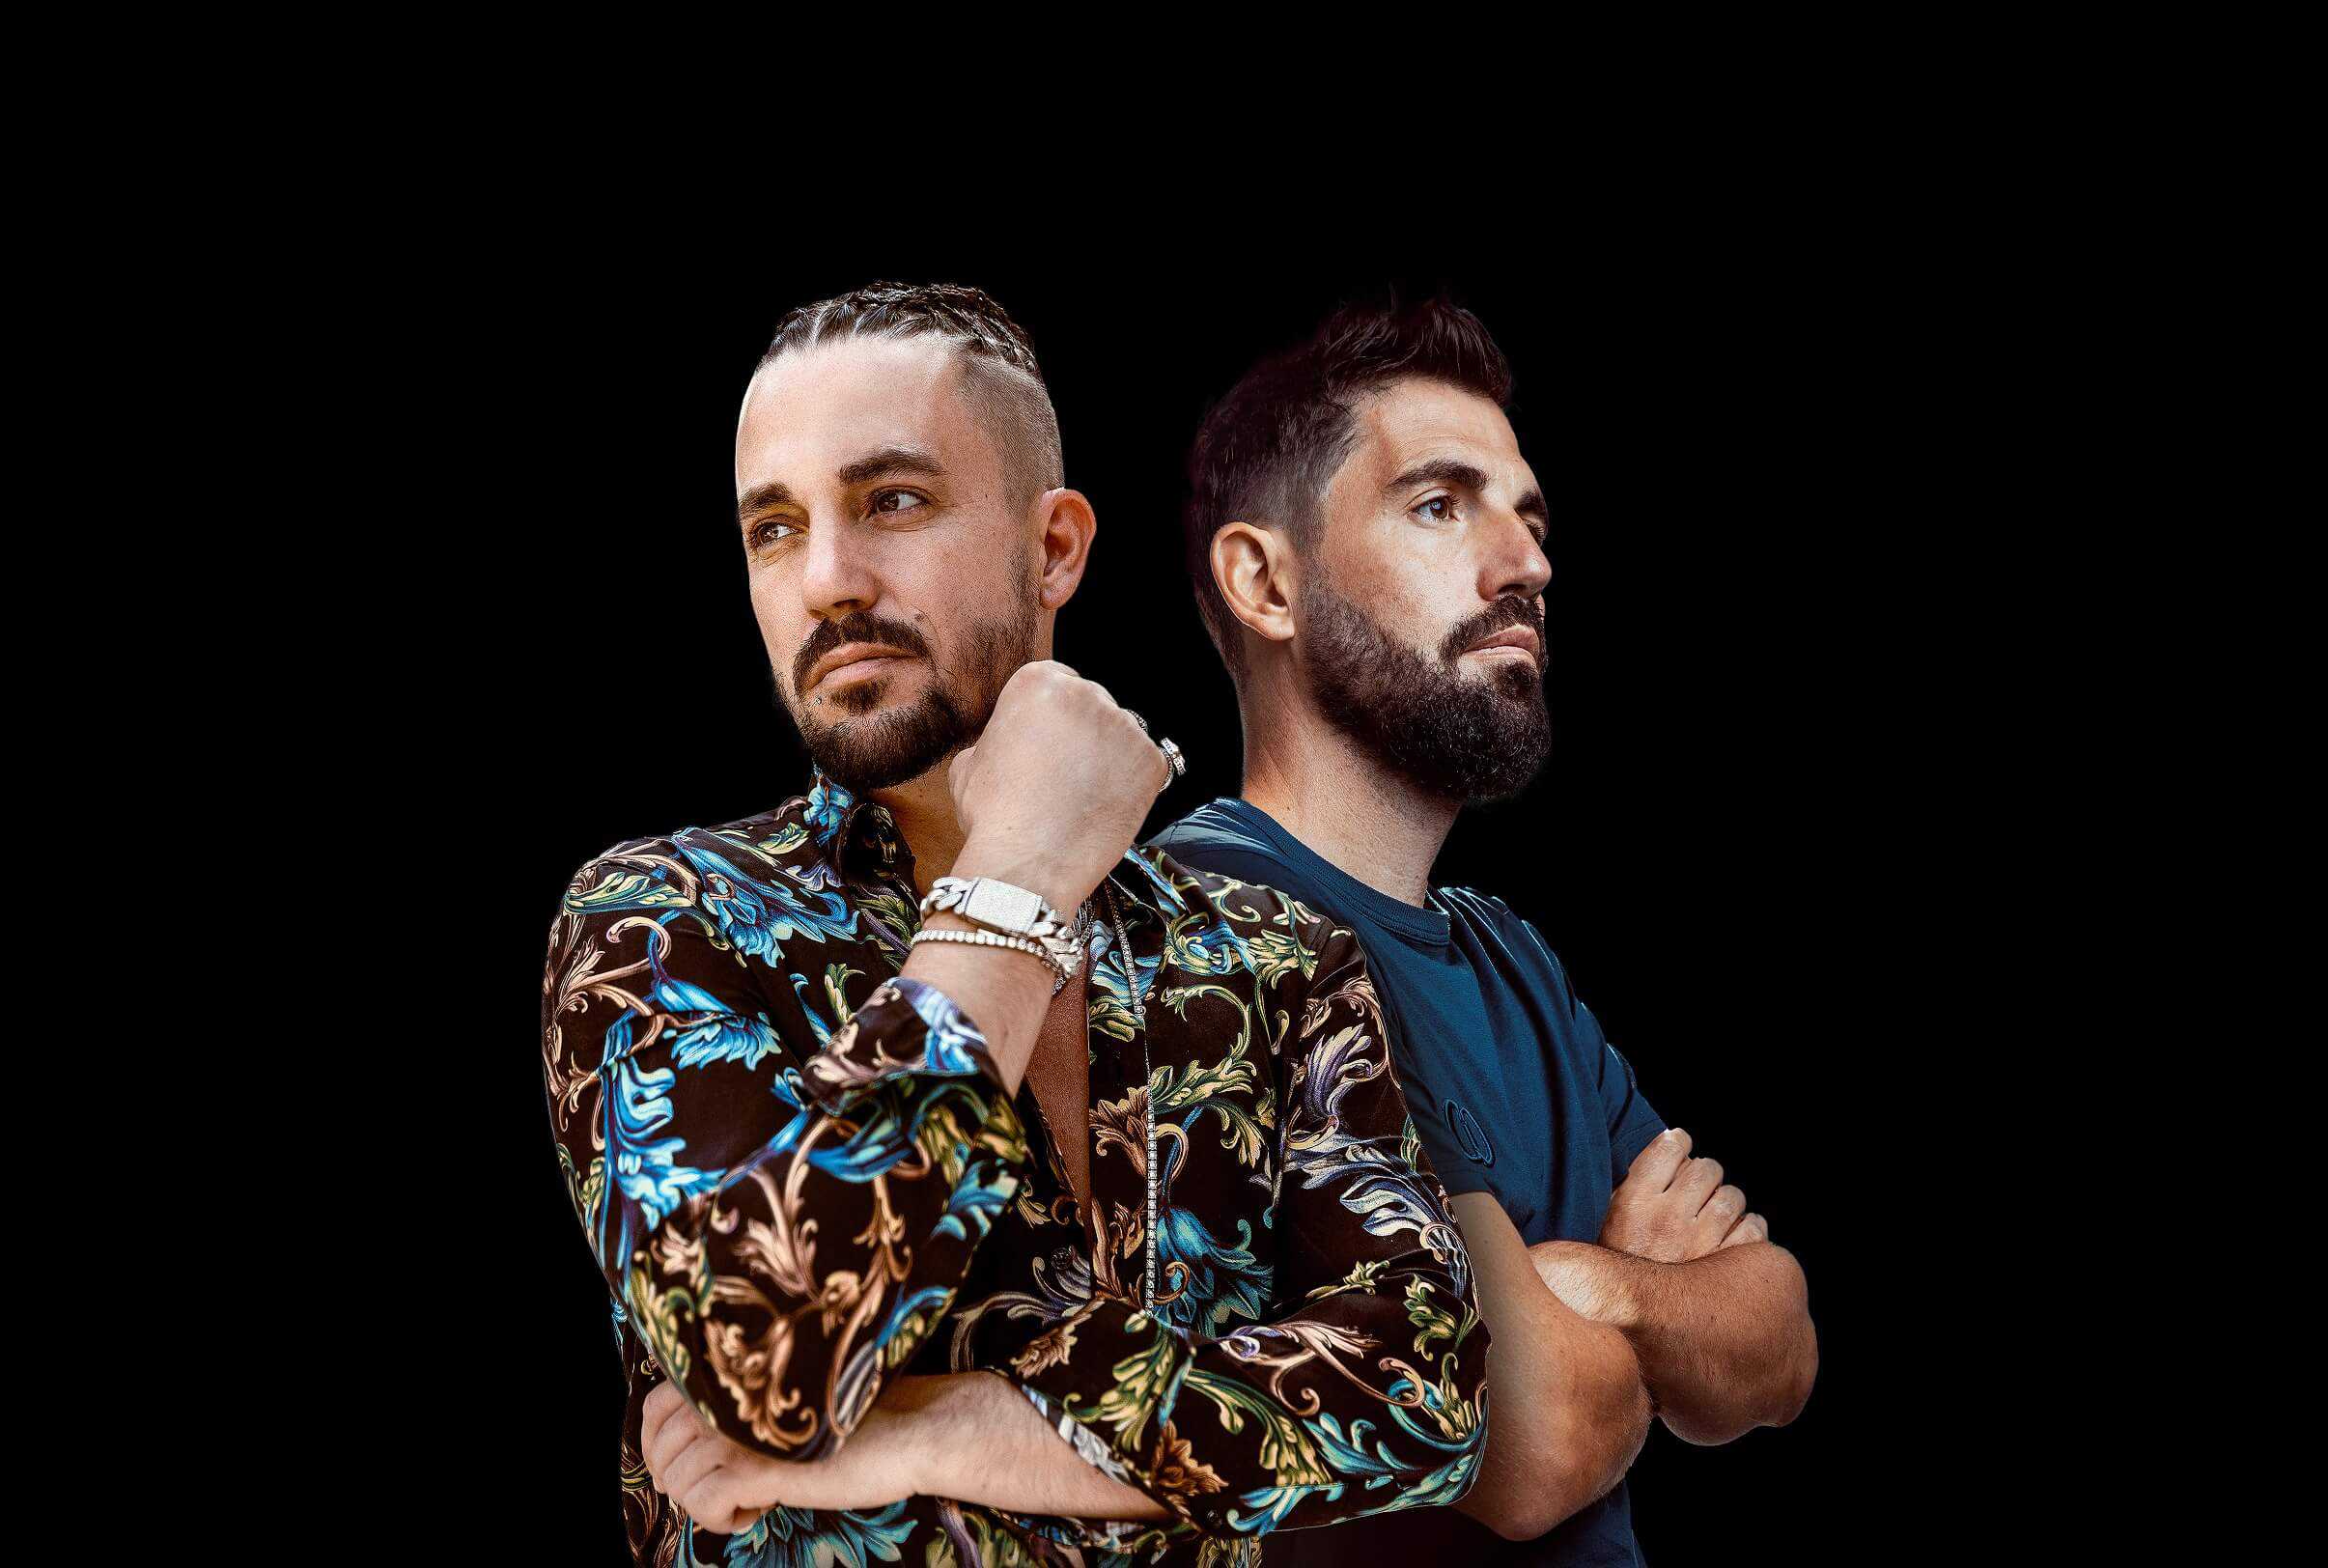 Dimitri Vegas & Like Mike and Quintino go ‘Back To The Oldskool’ with hardstyle banger: Listen